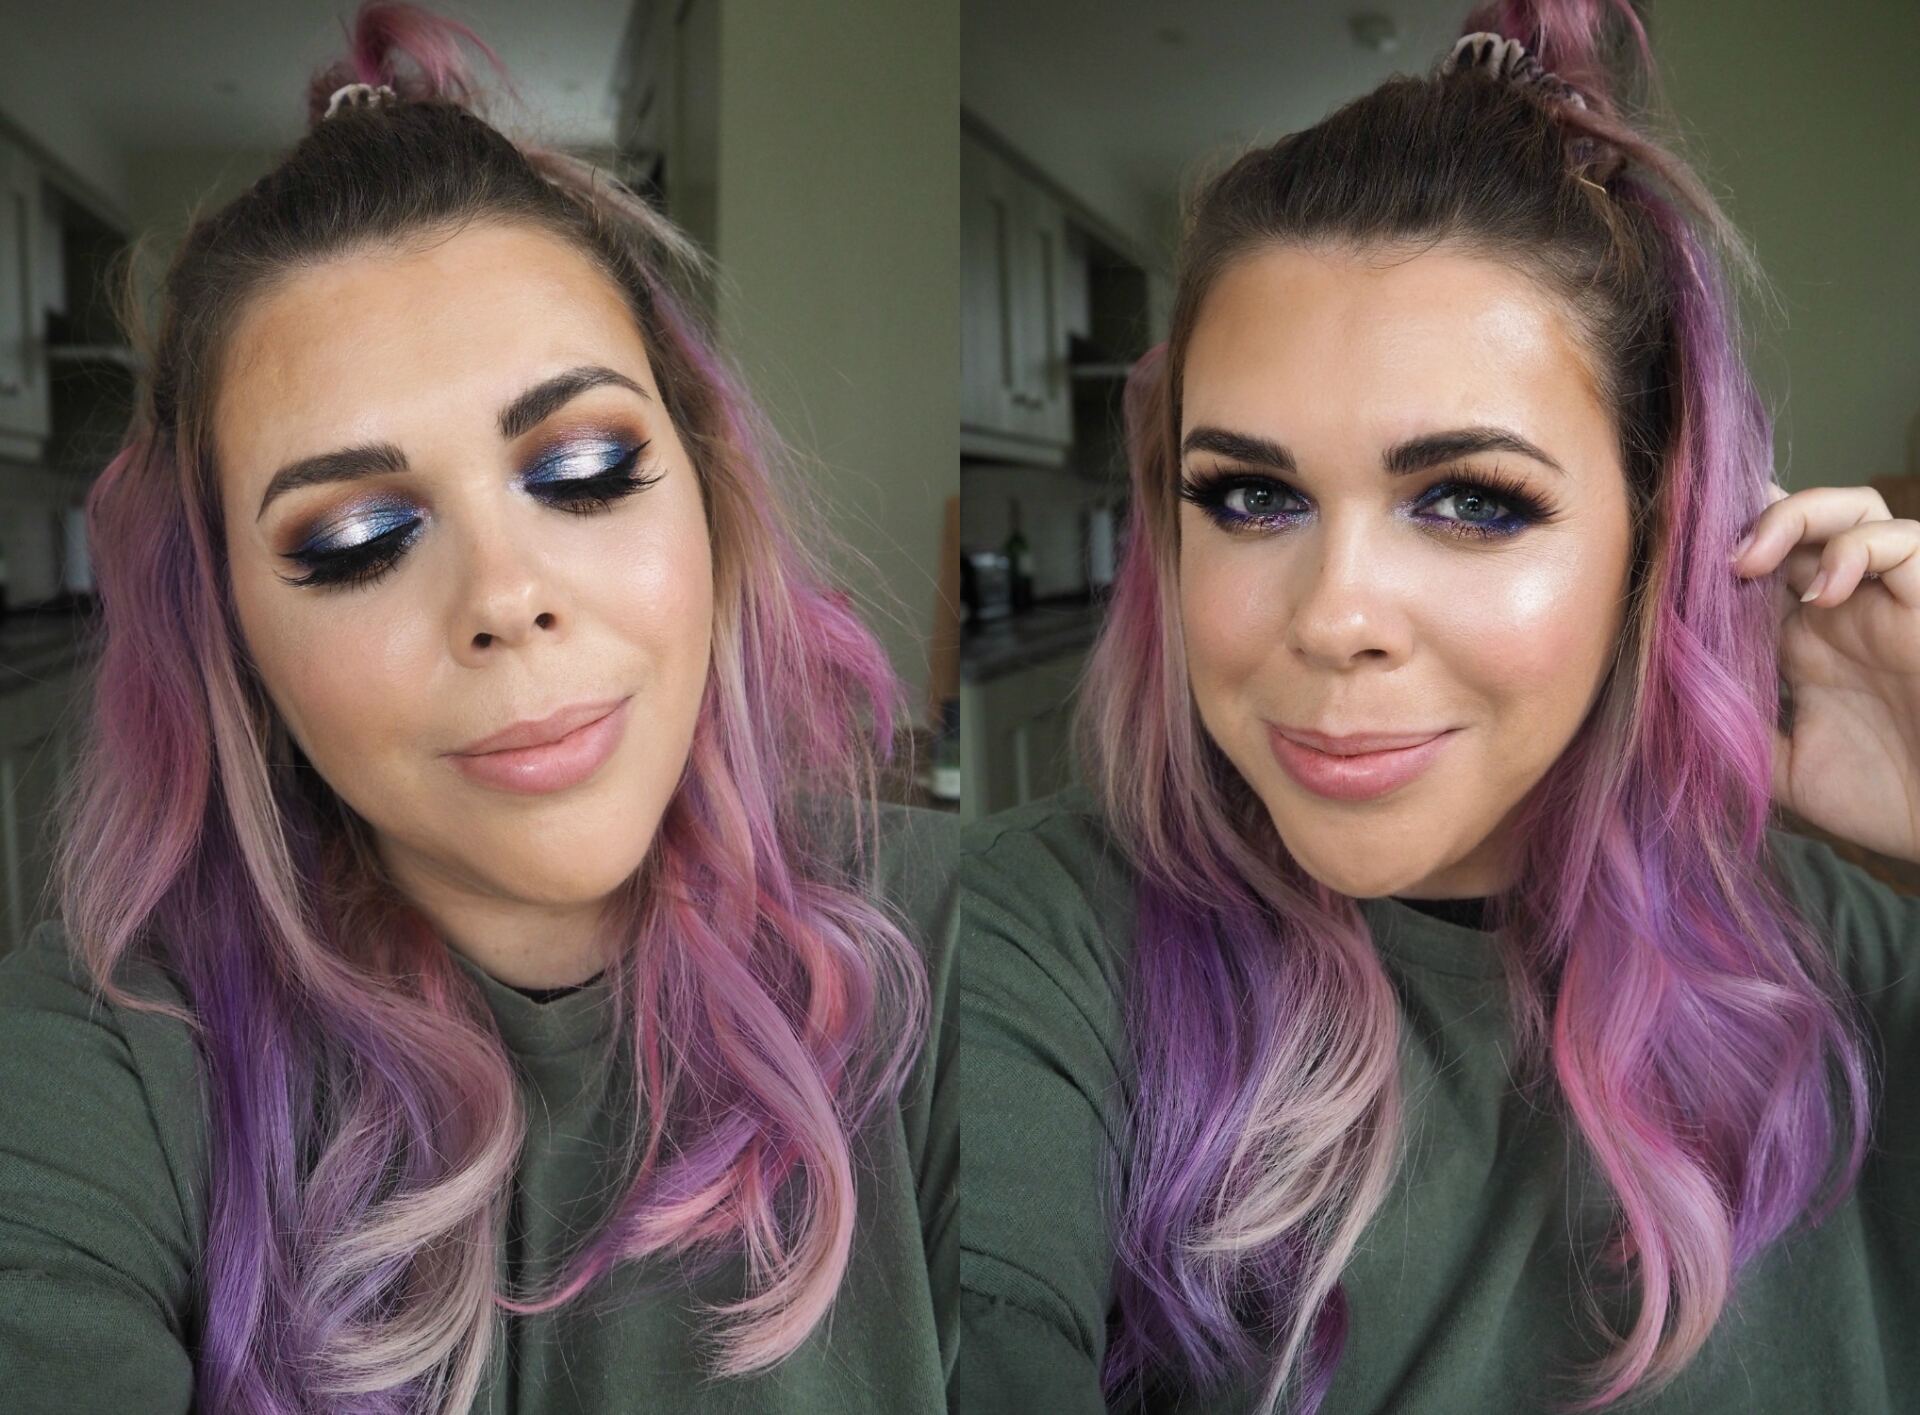 Urban Decay Stoned Vibes Eyeshadow Palette Review, Swatches Eye Makeup Looks. - Laura Louise Makeup + Beauty